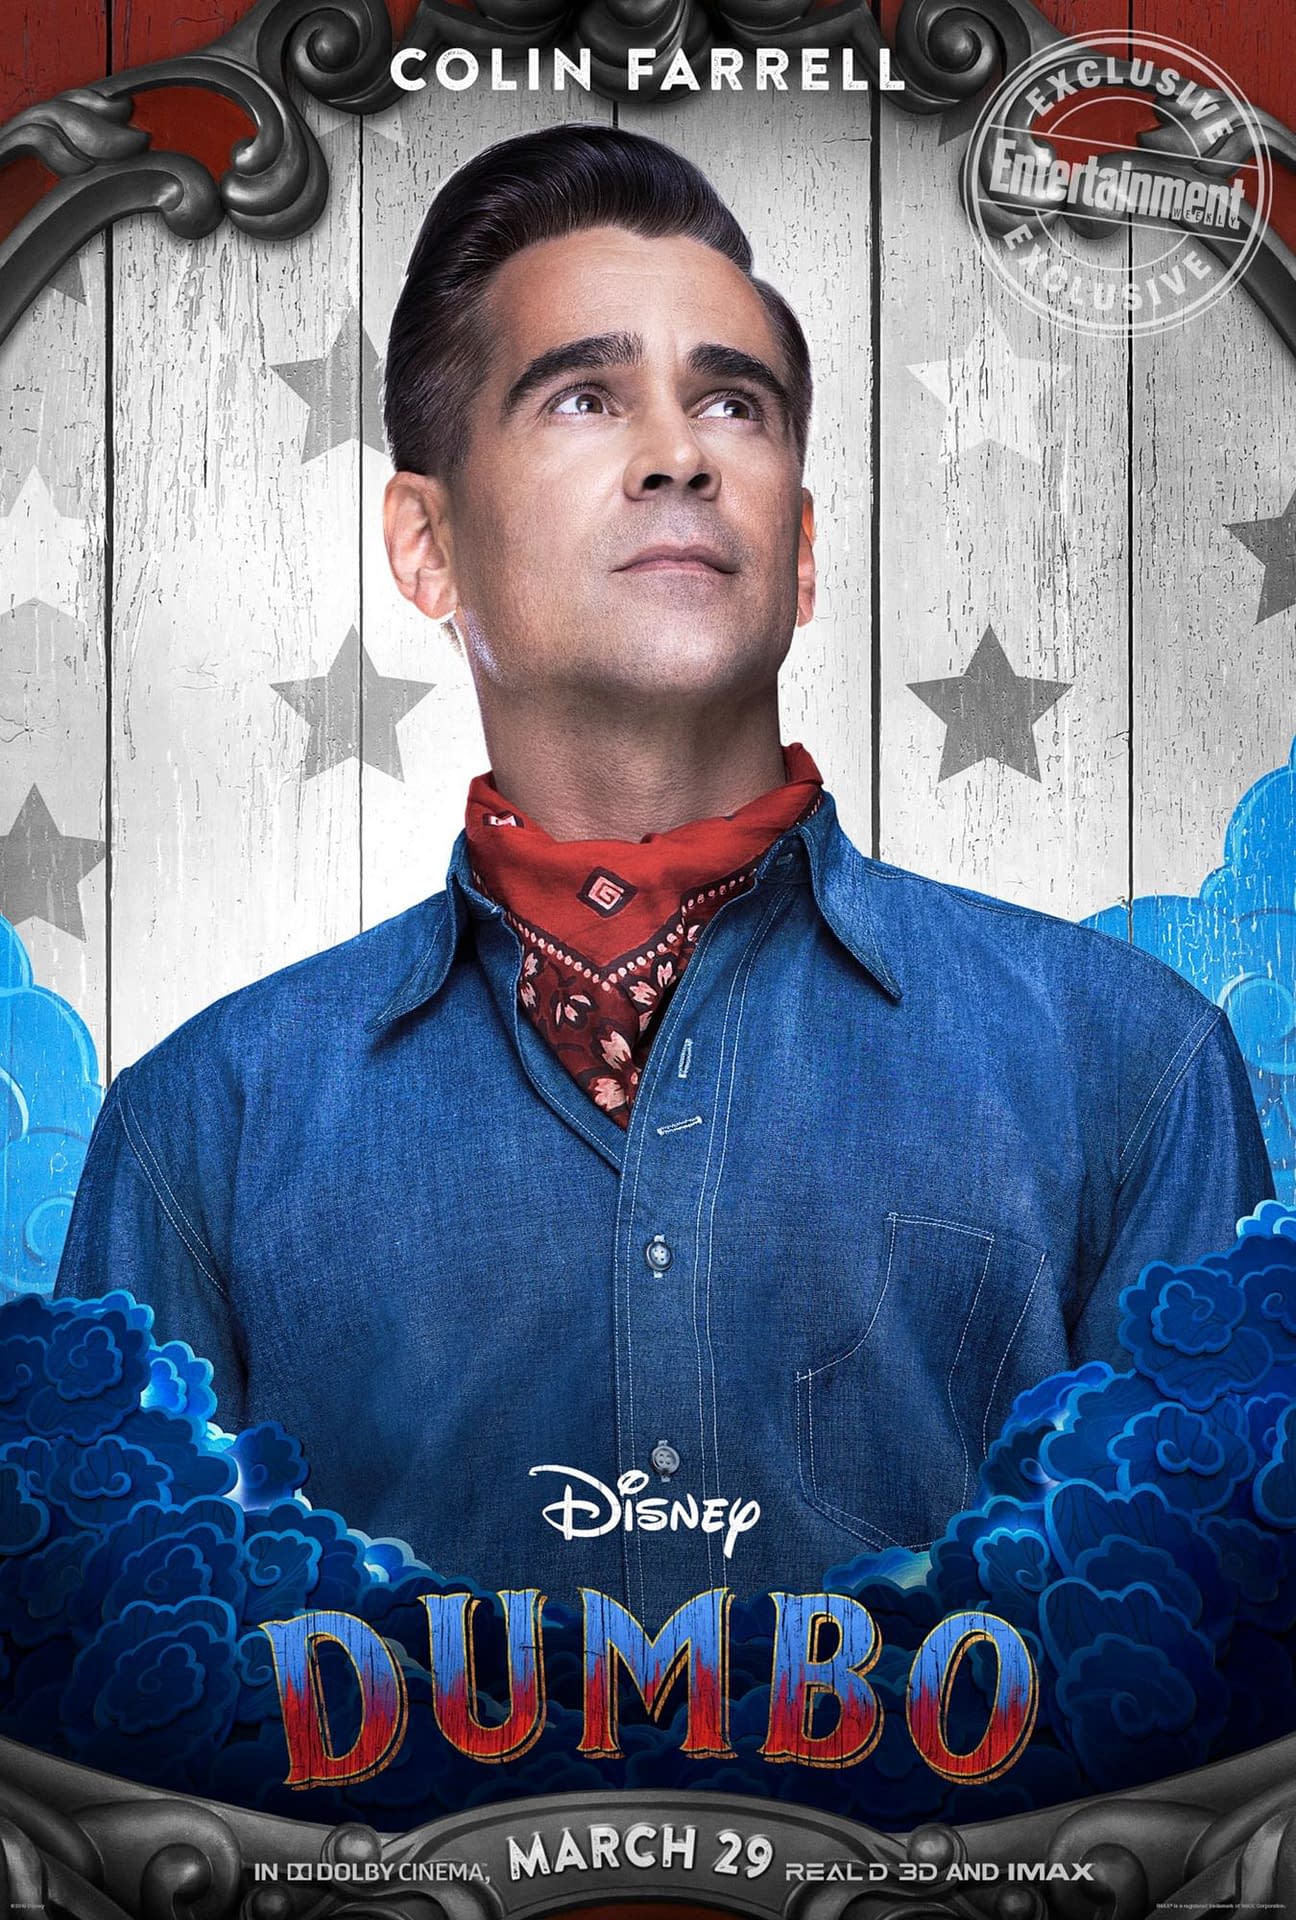 5 New Character Posters for the Live-Action Dumbo Remake